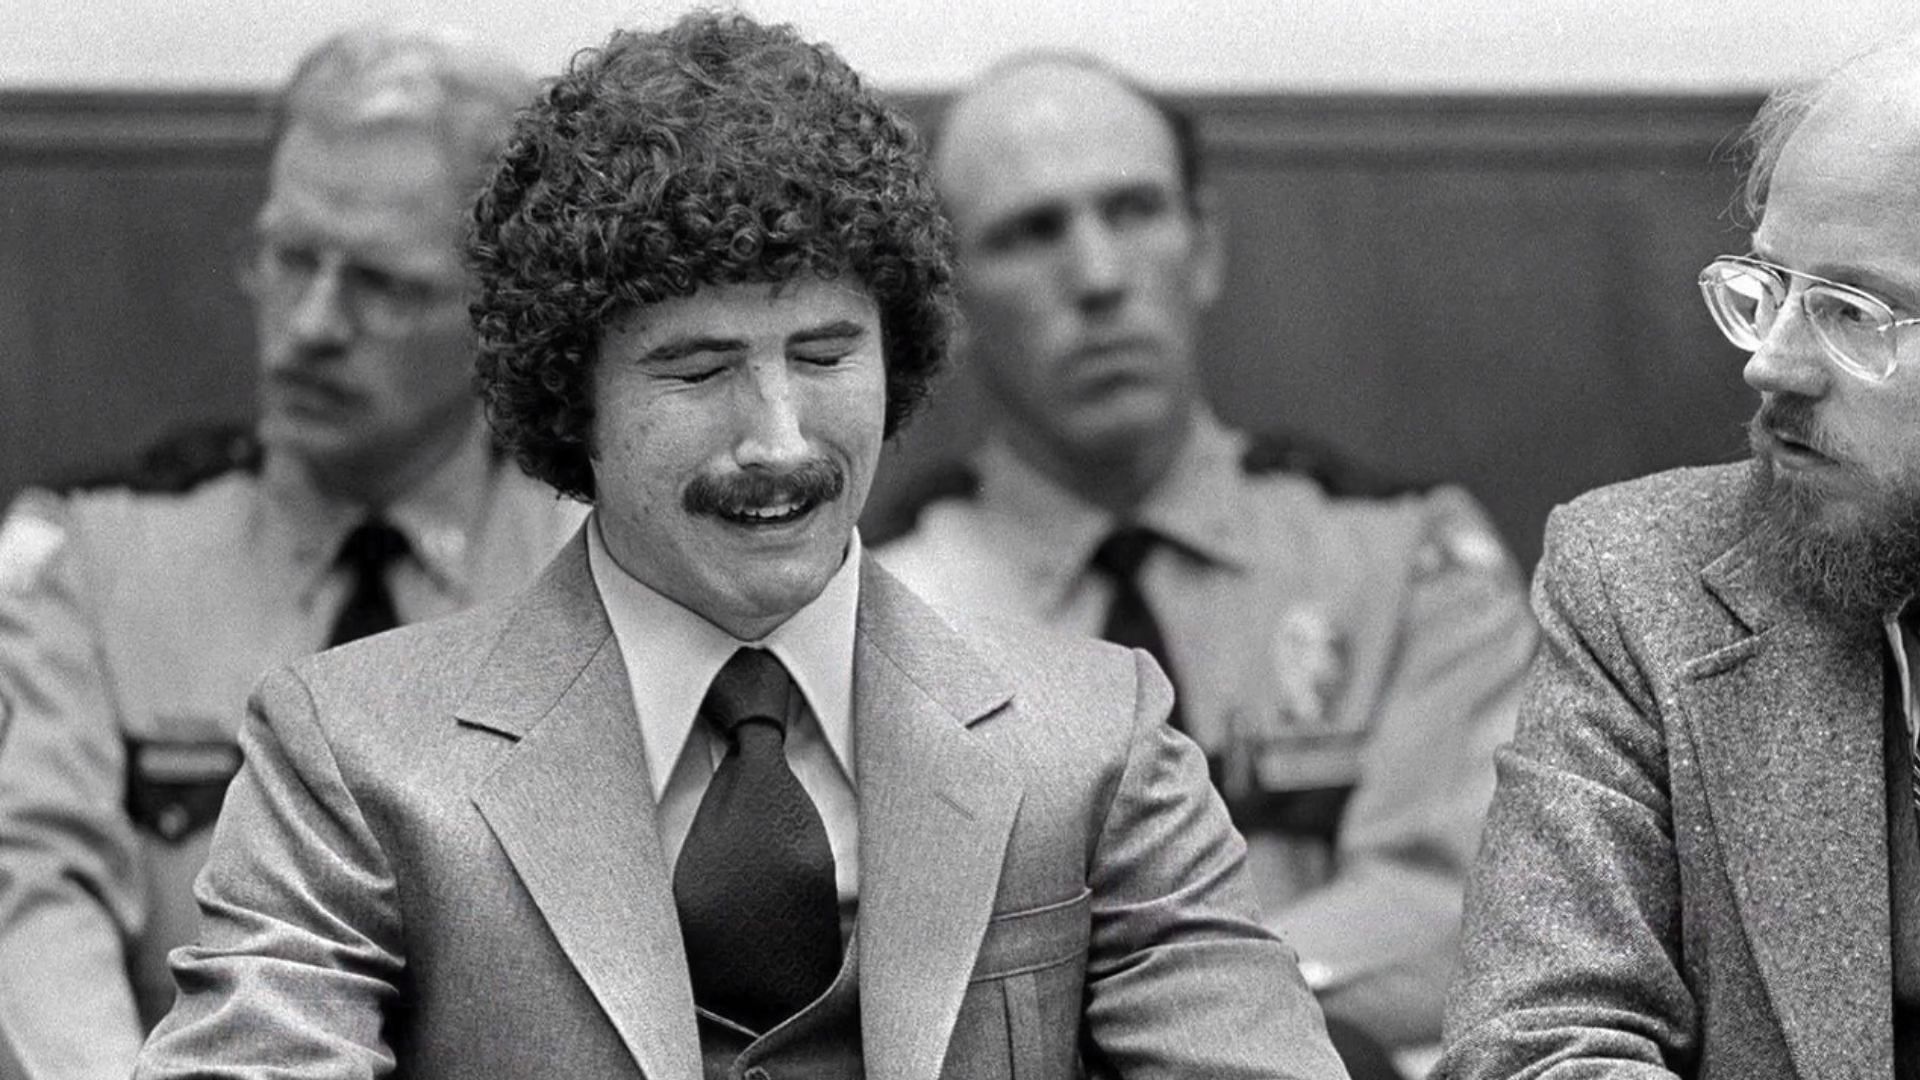 Kenneth Bianchi in the courtroom on trial for his crimes (Image via AP Photo/Don Anderson)